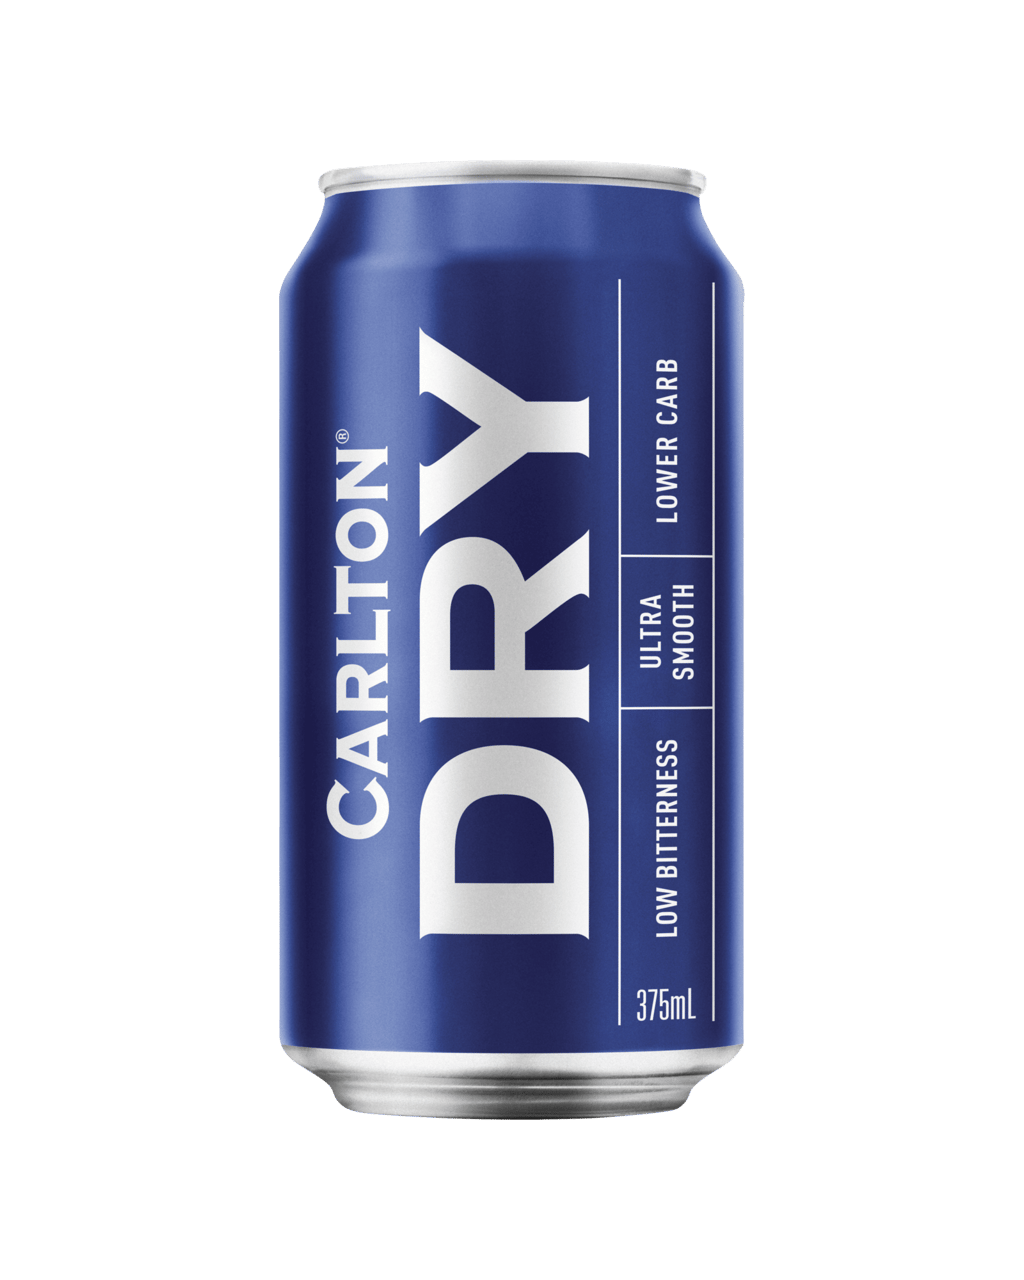 Carlton - Dry / Lager / 375mL / Can